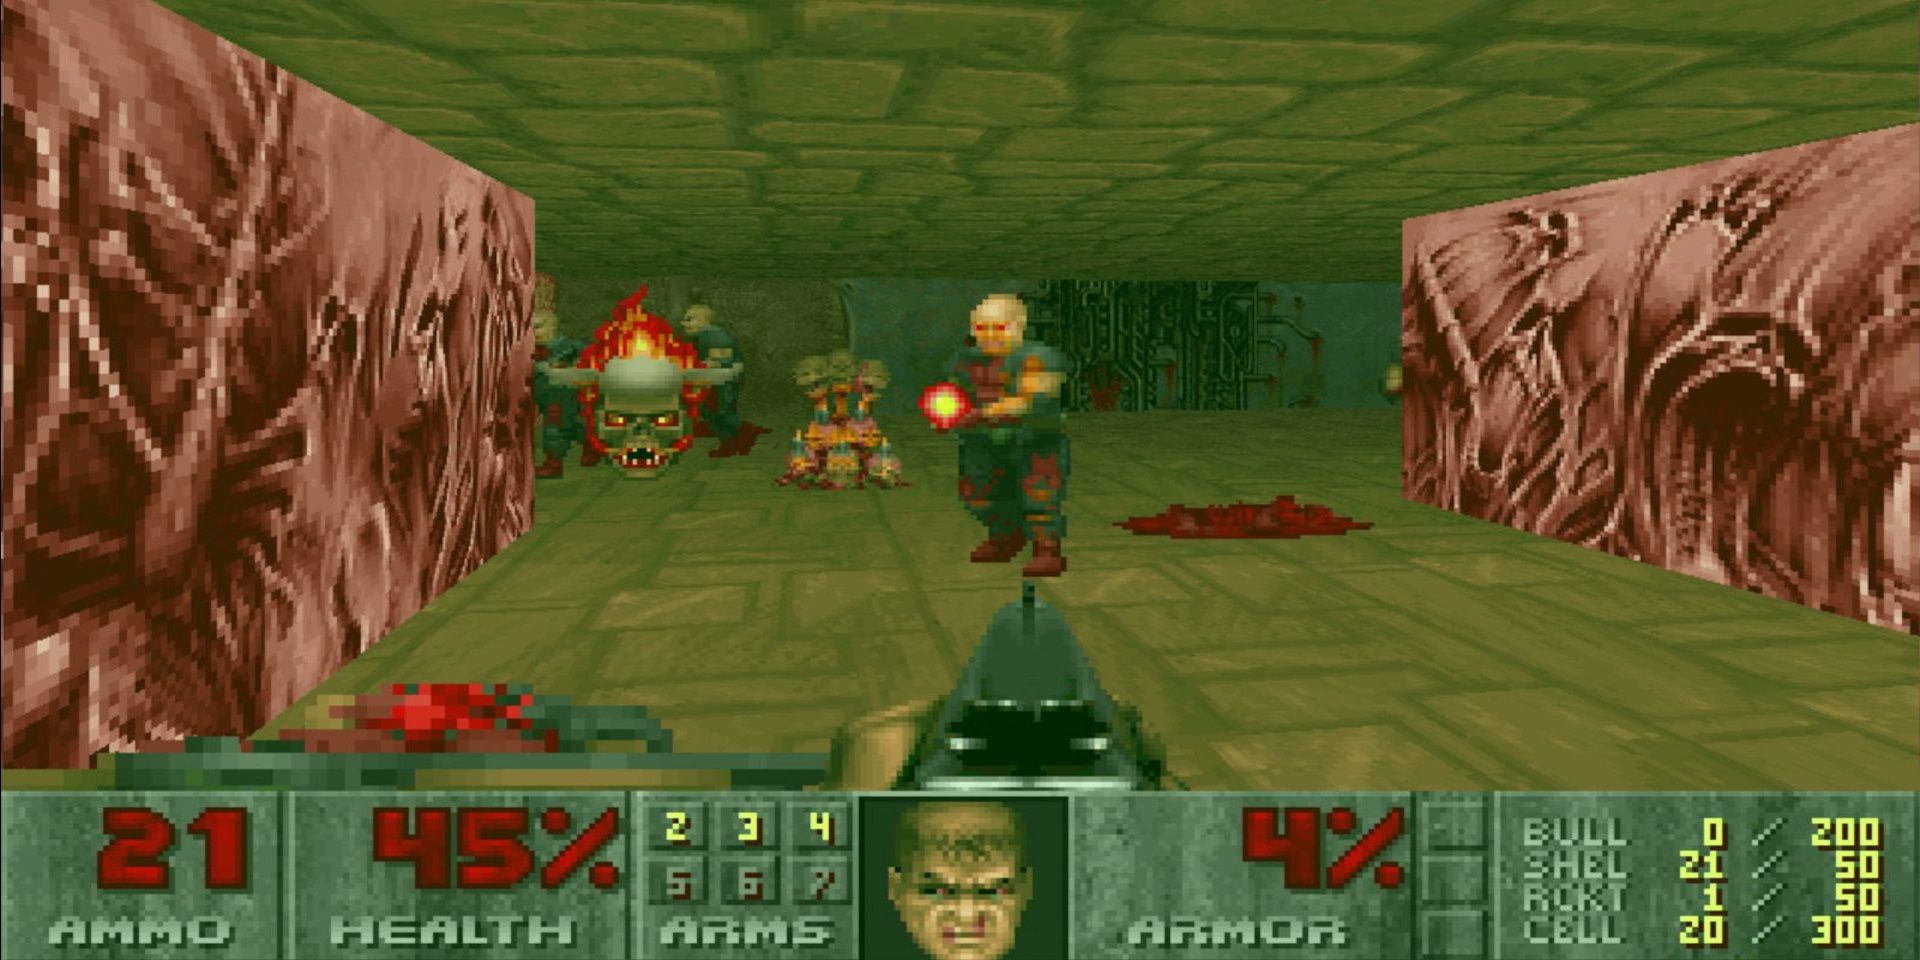 Shooting at a stationary enemy in Doom